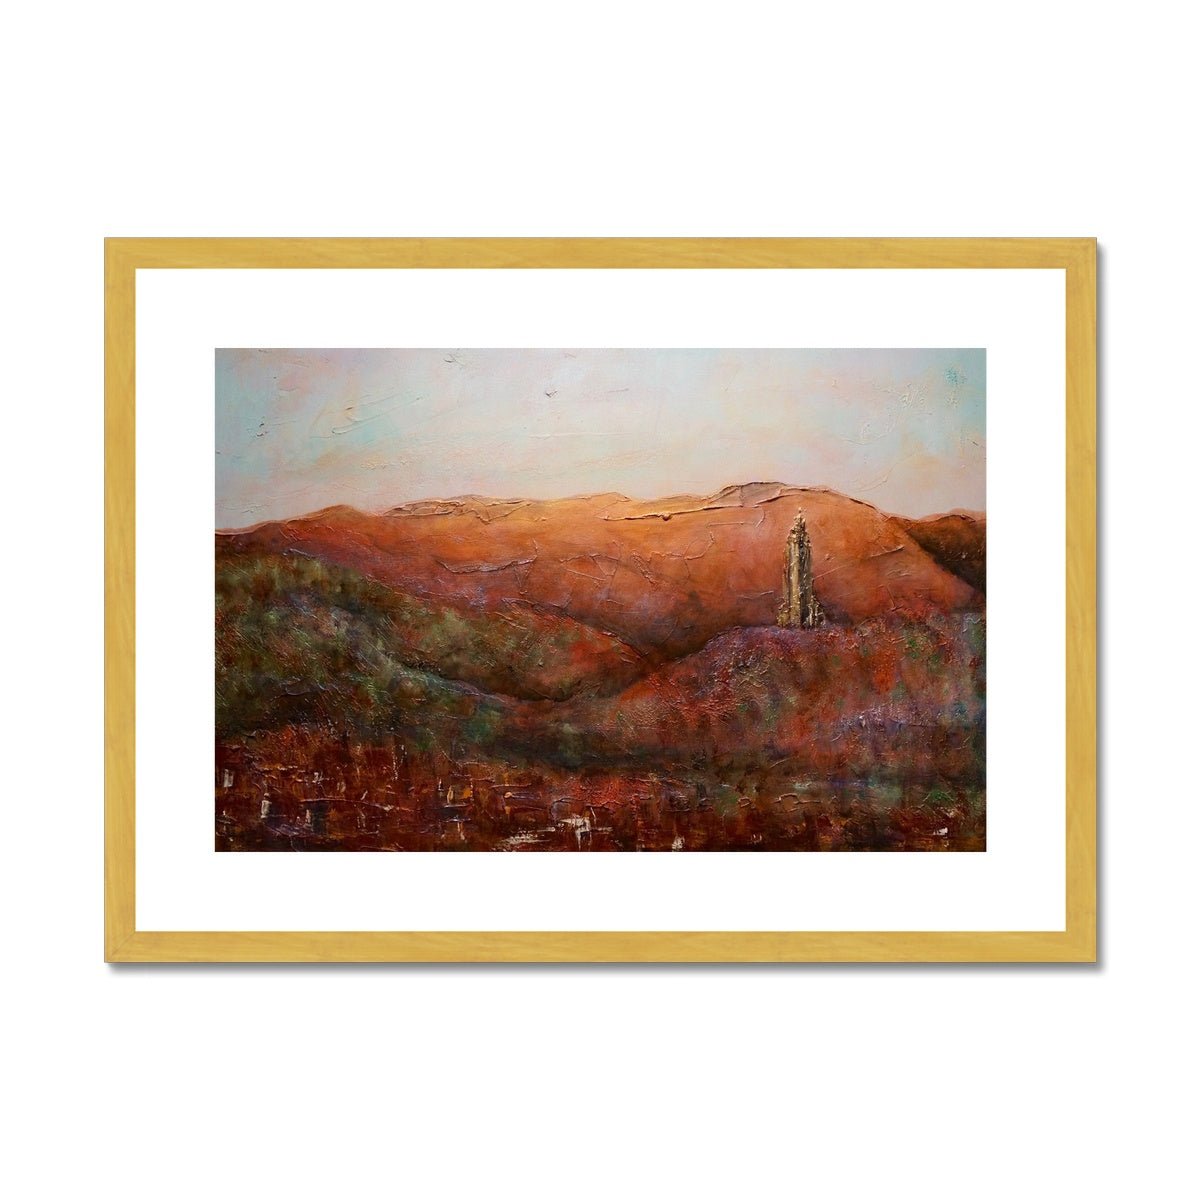 The Wallace Monument Painting | Antique Framed & Mounted Prints From Scotland-Antique Framed & Mounted Prints-Historic & Iconic Scotland Art Gallery-A2 Landscape-Gold Frame-Paintings, Prints, Homeware, Art Gifts From Scotland By Scottish Artist Kevin Hunter